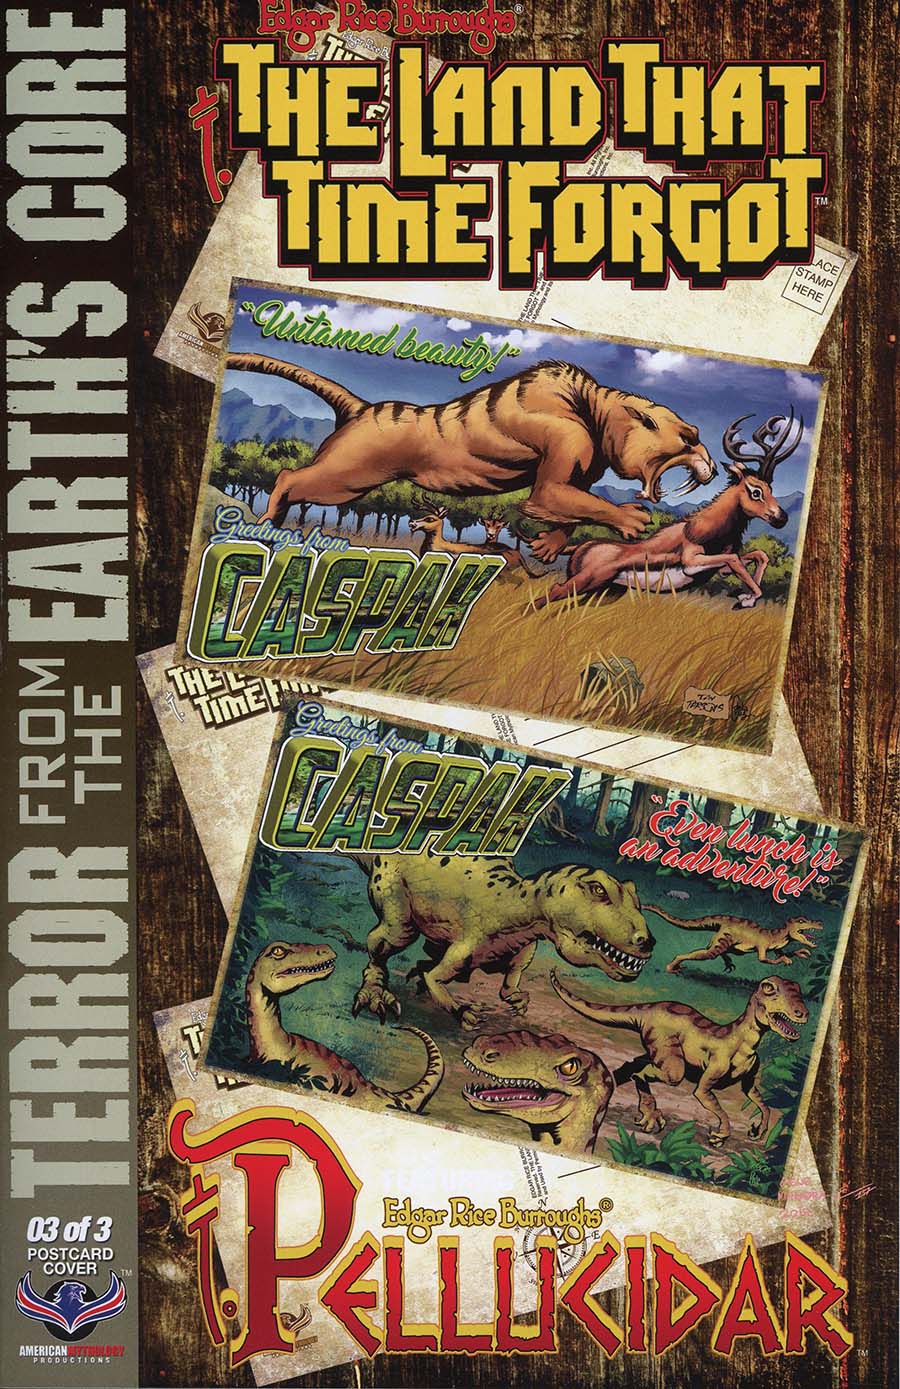 Edgar Rice Burroughs Land That Time Forgot Terror From The Earths Core #3 Cover C Incentive Dan Parsons Wish You Were Here Postcard Variant Cover